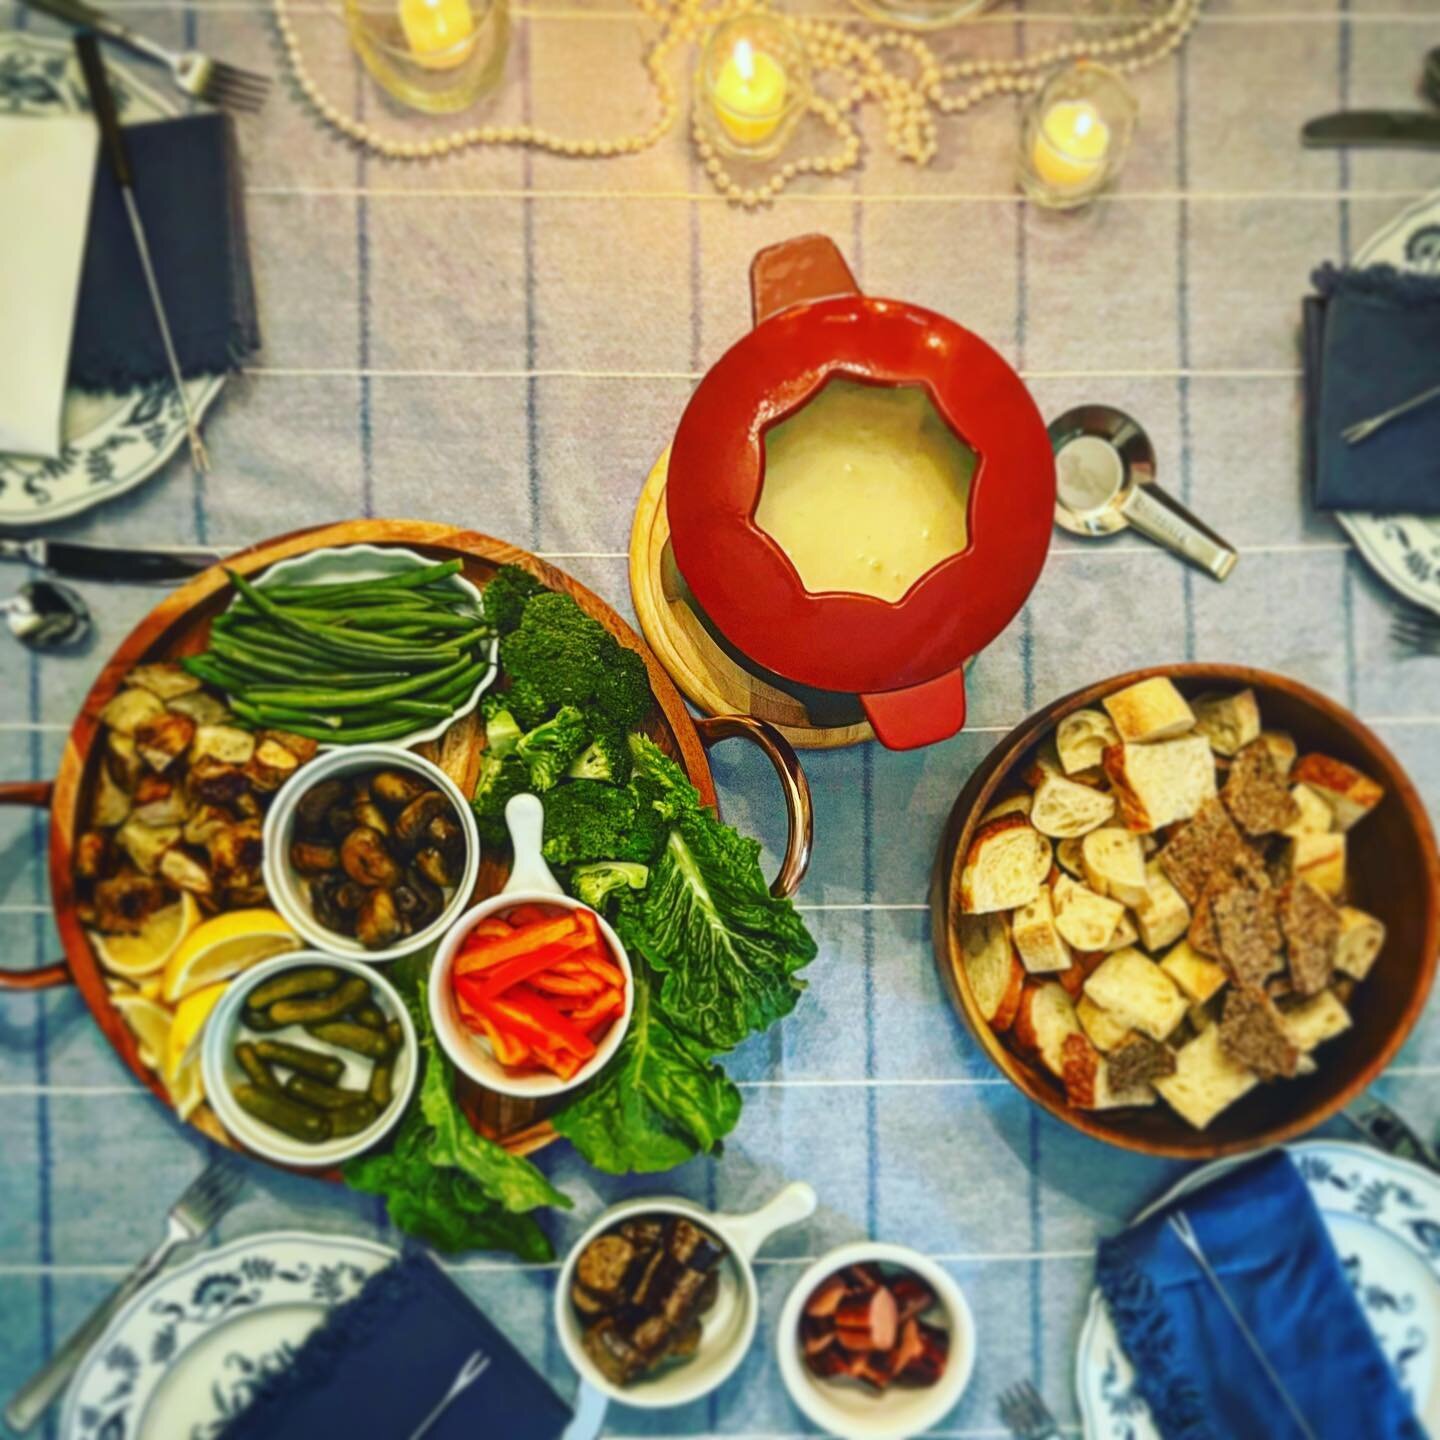 NYE #fondue with all the trimmings! #swisspride🇨🇭